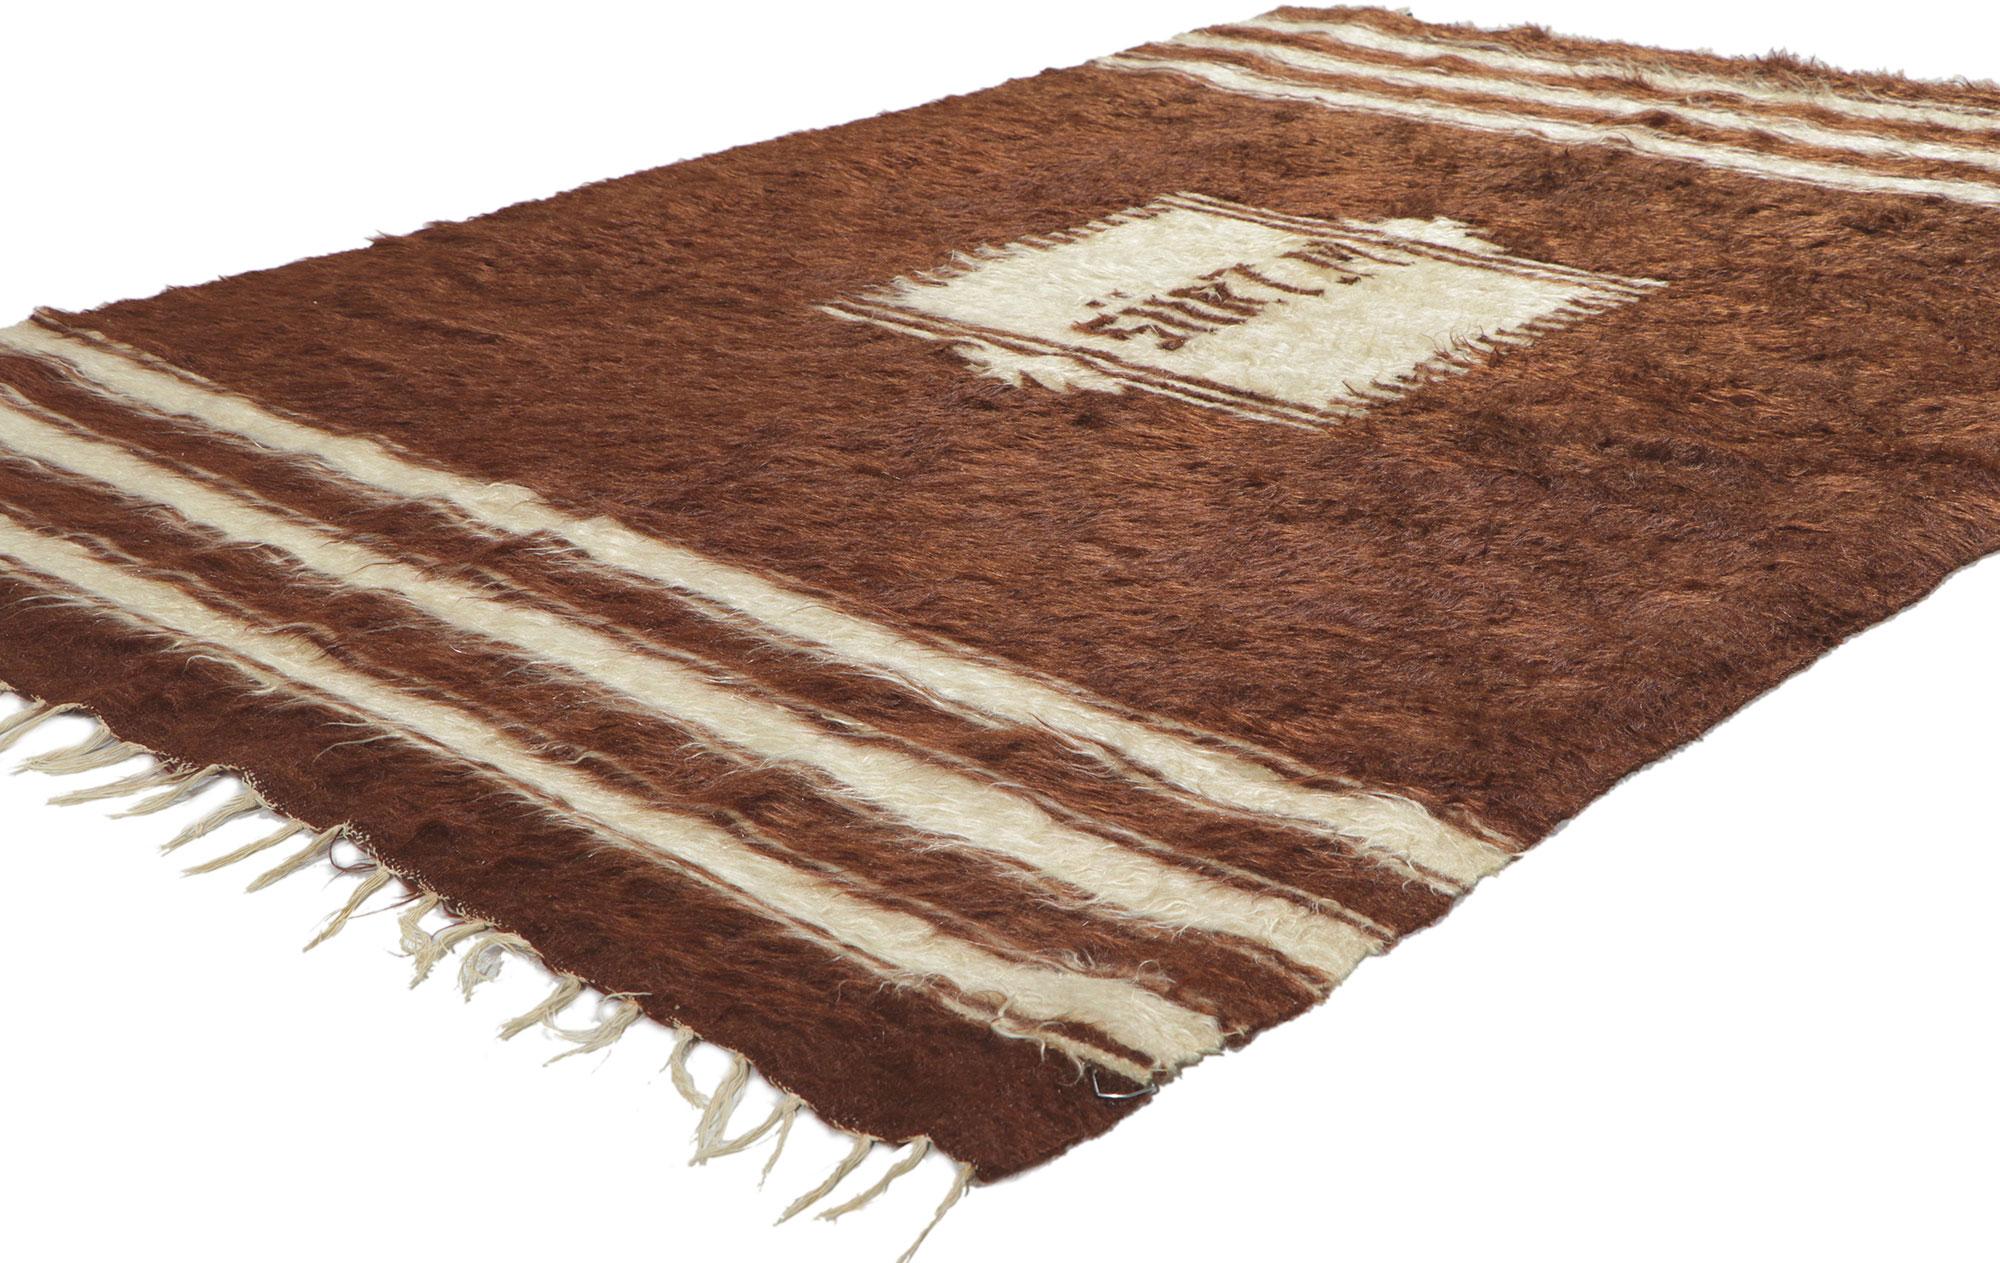 53832 Vintage Turkish Angora Wool Kilim Blanket Rug, 04'05 x 06'05. With its shaggy pile, incredible detail and texture, this handwoven Turkish angora kilim rug is a captivating vision of woven beauty. The eye-catching geometric design and earthy